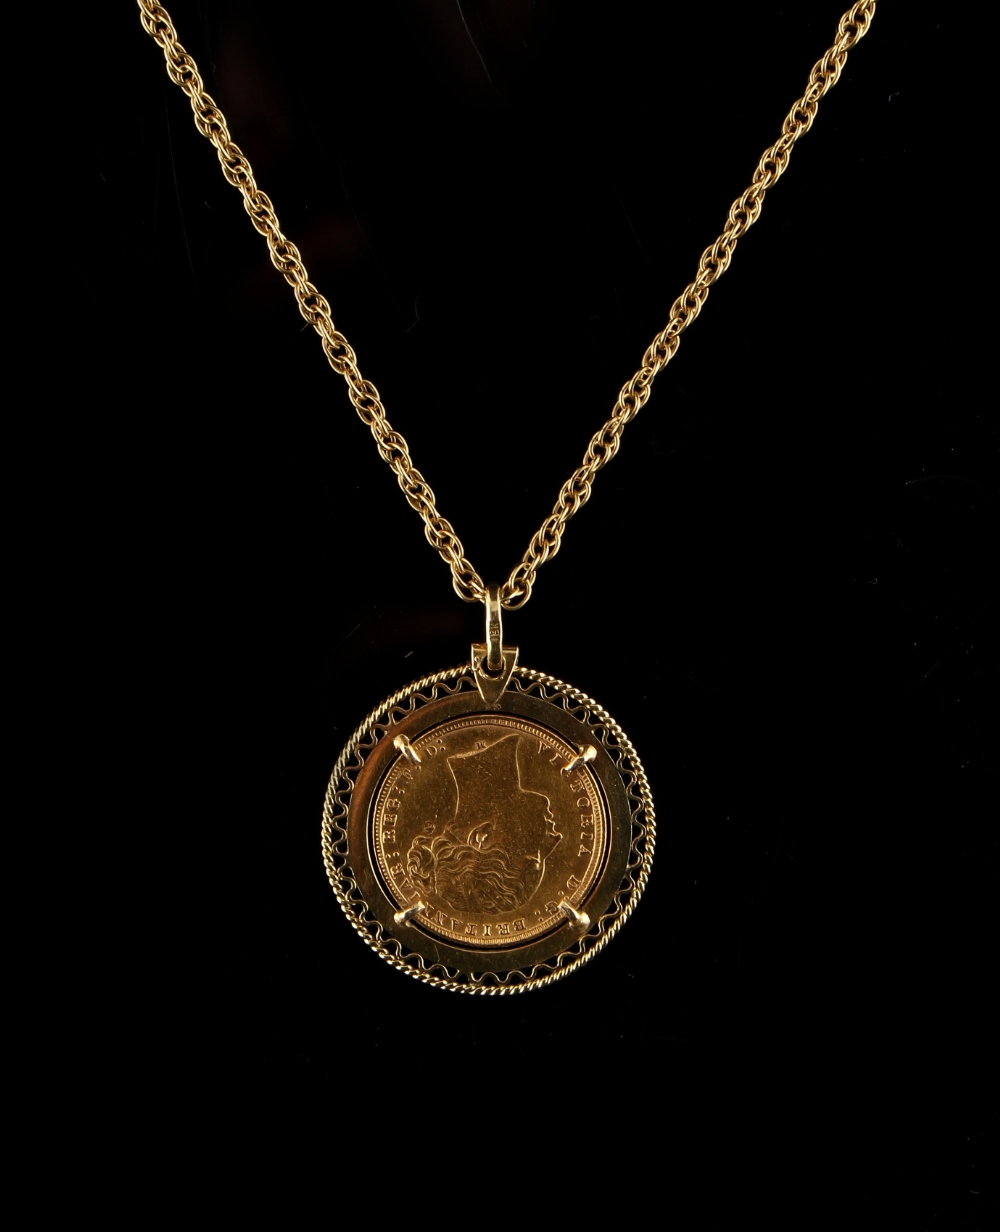 Property of a deceased estate - an 18ct gold mounted full sovereign coin pendant on chain, the